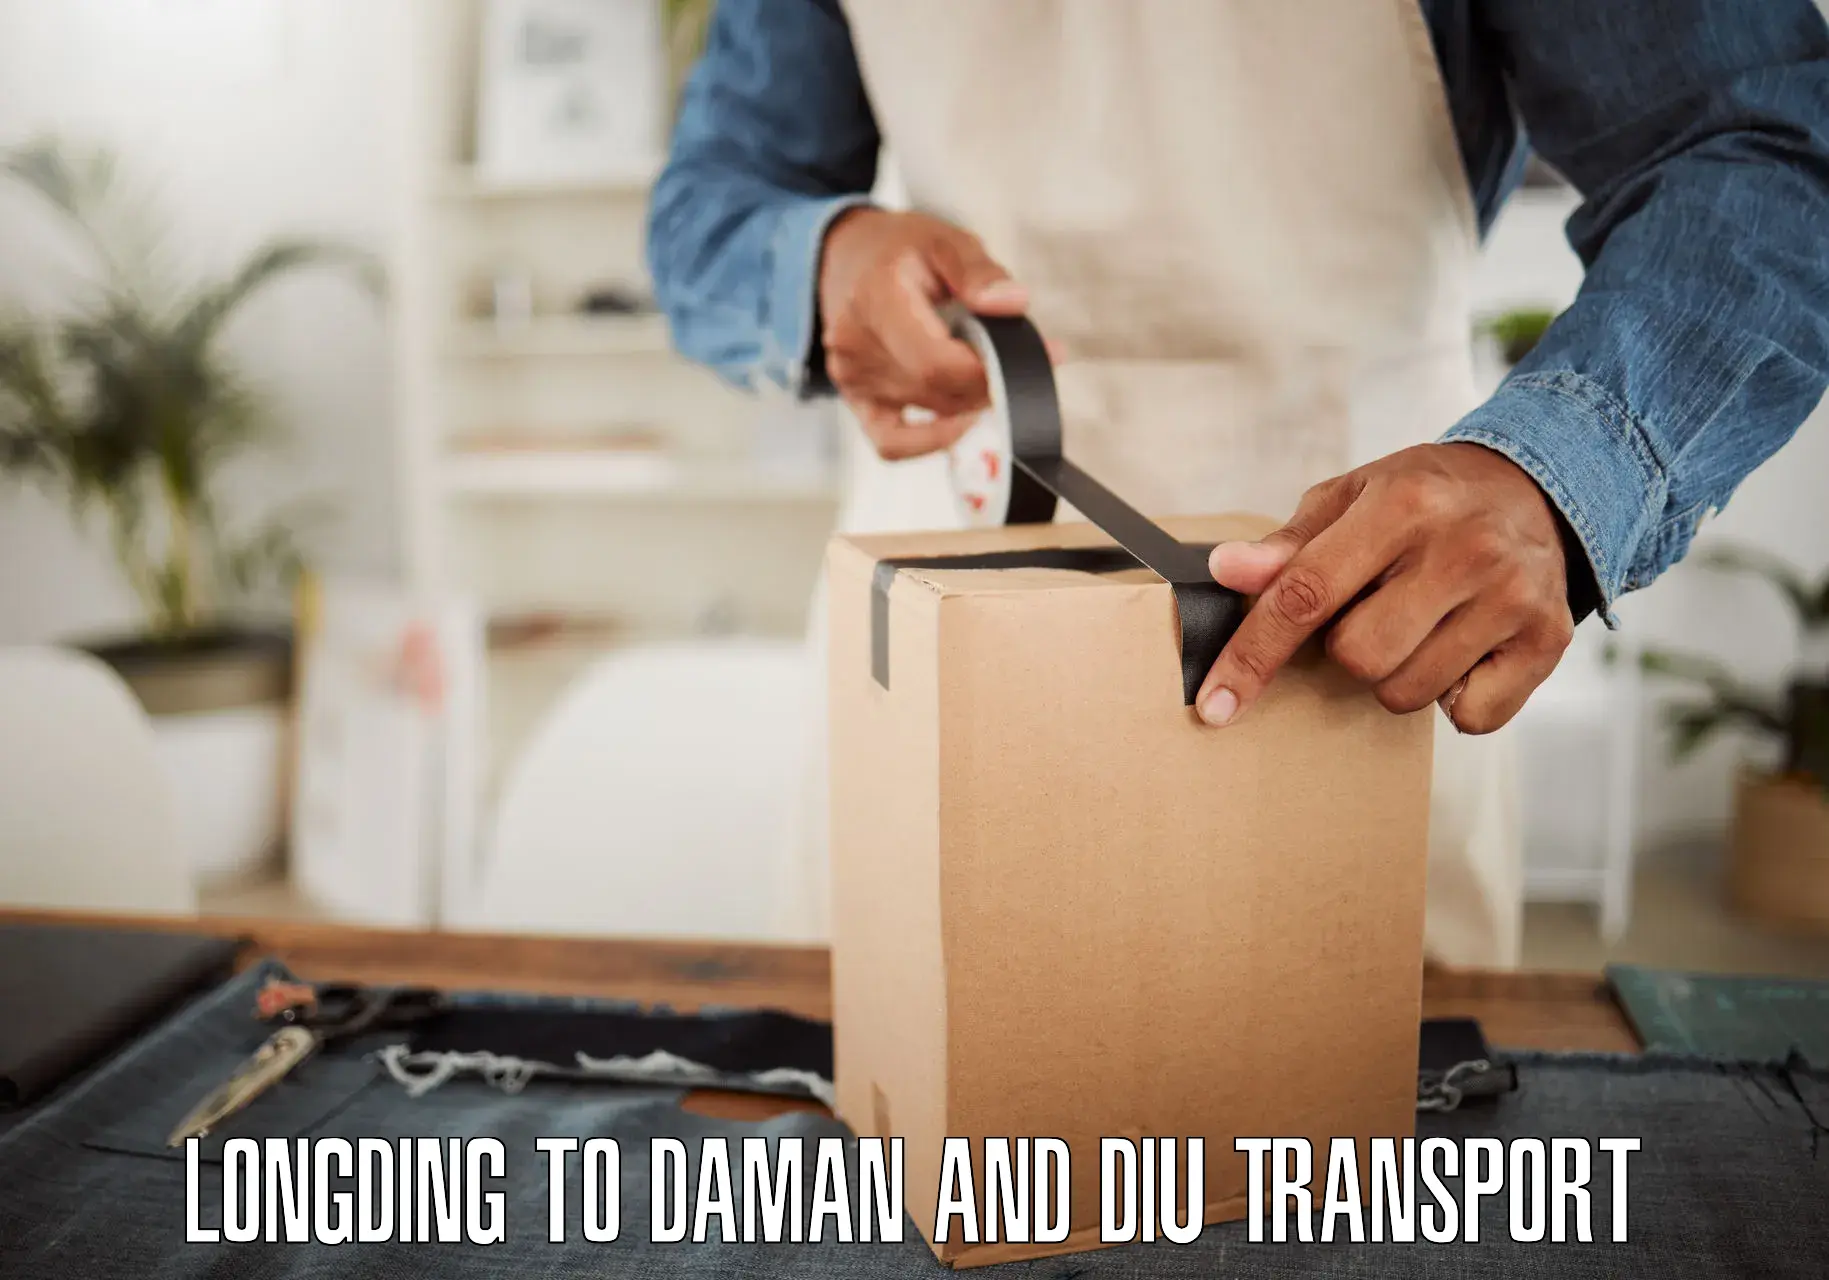 Parcel transport services Longding to Daman and Diu